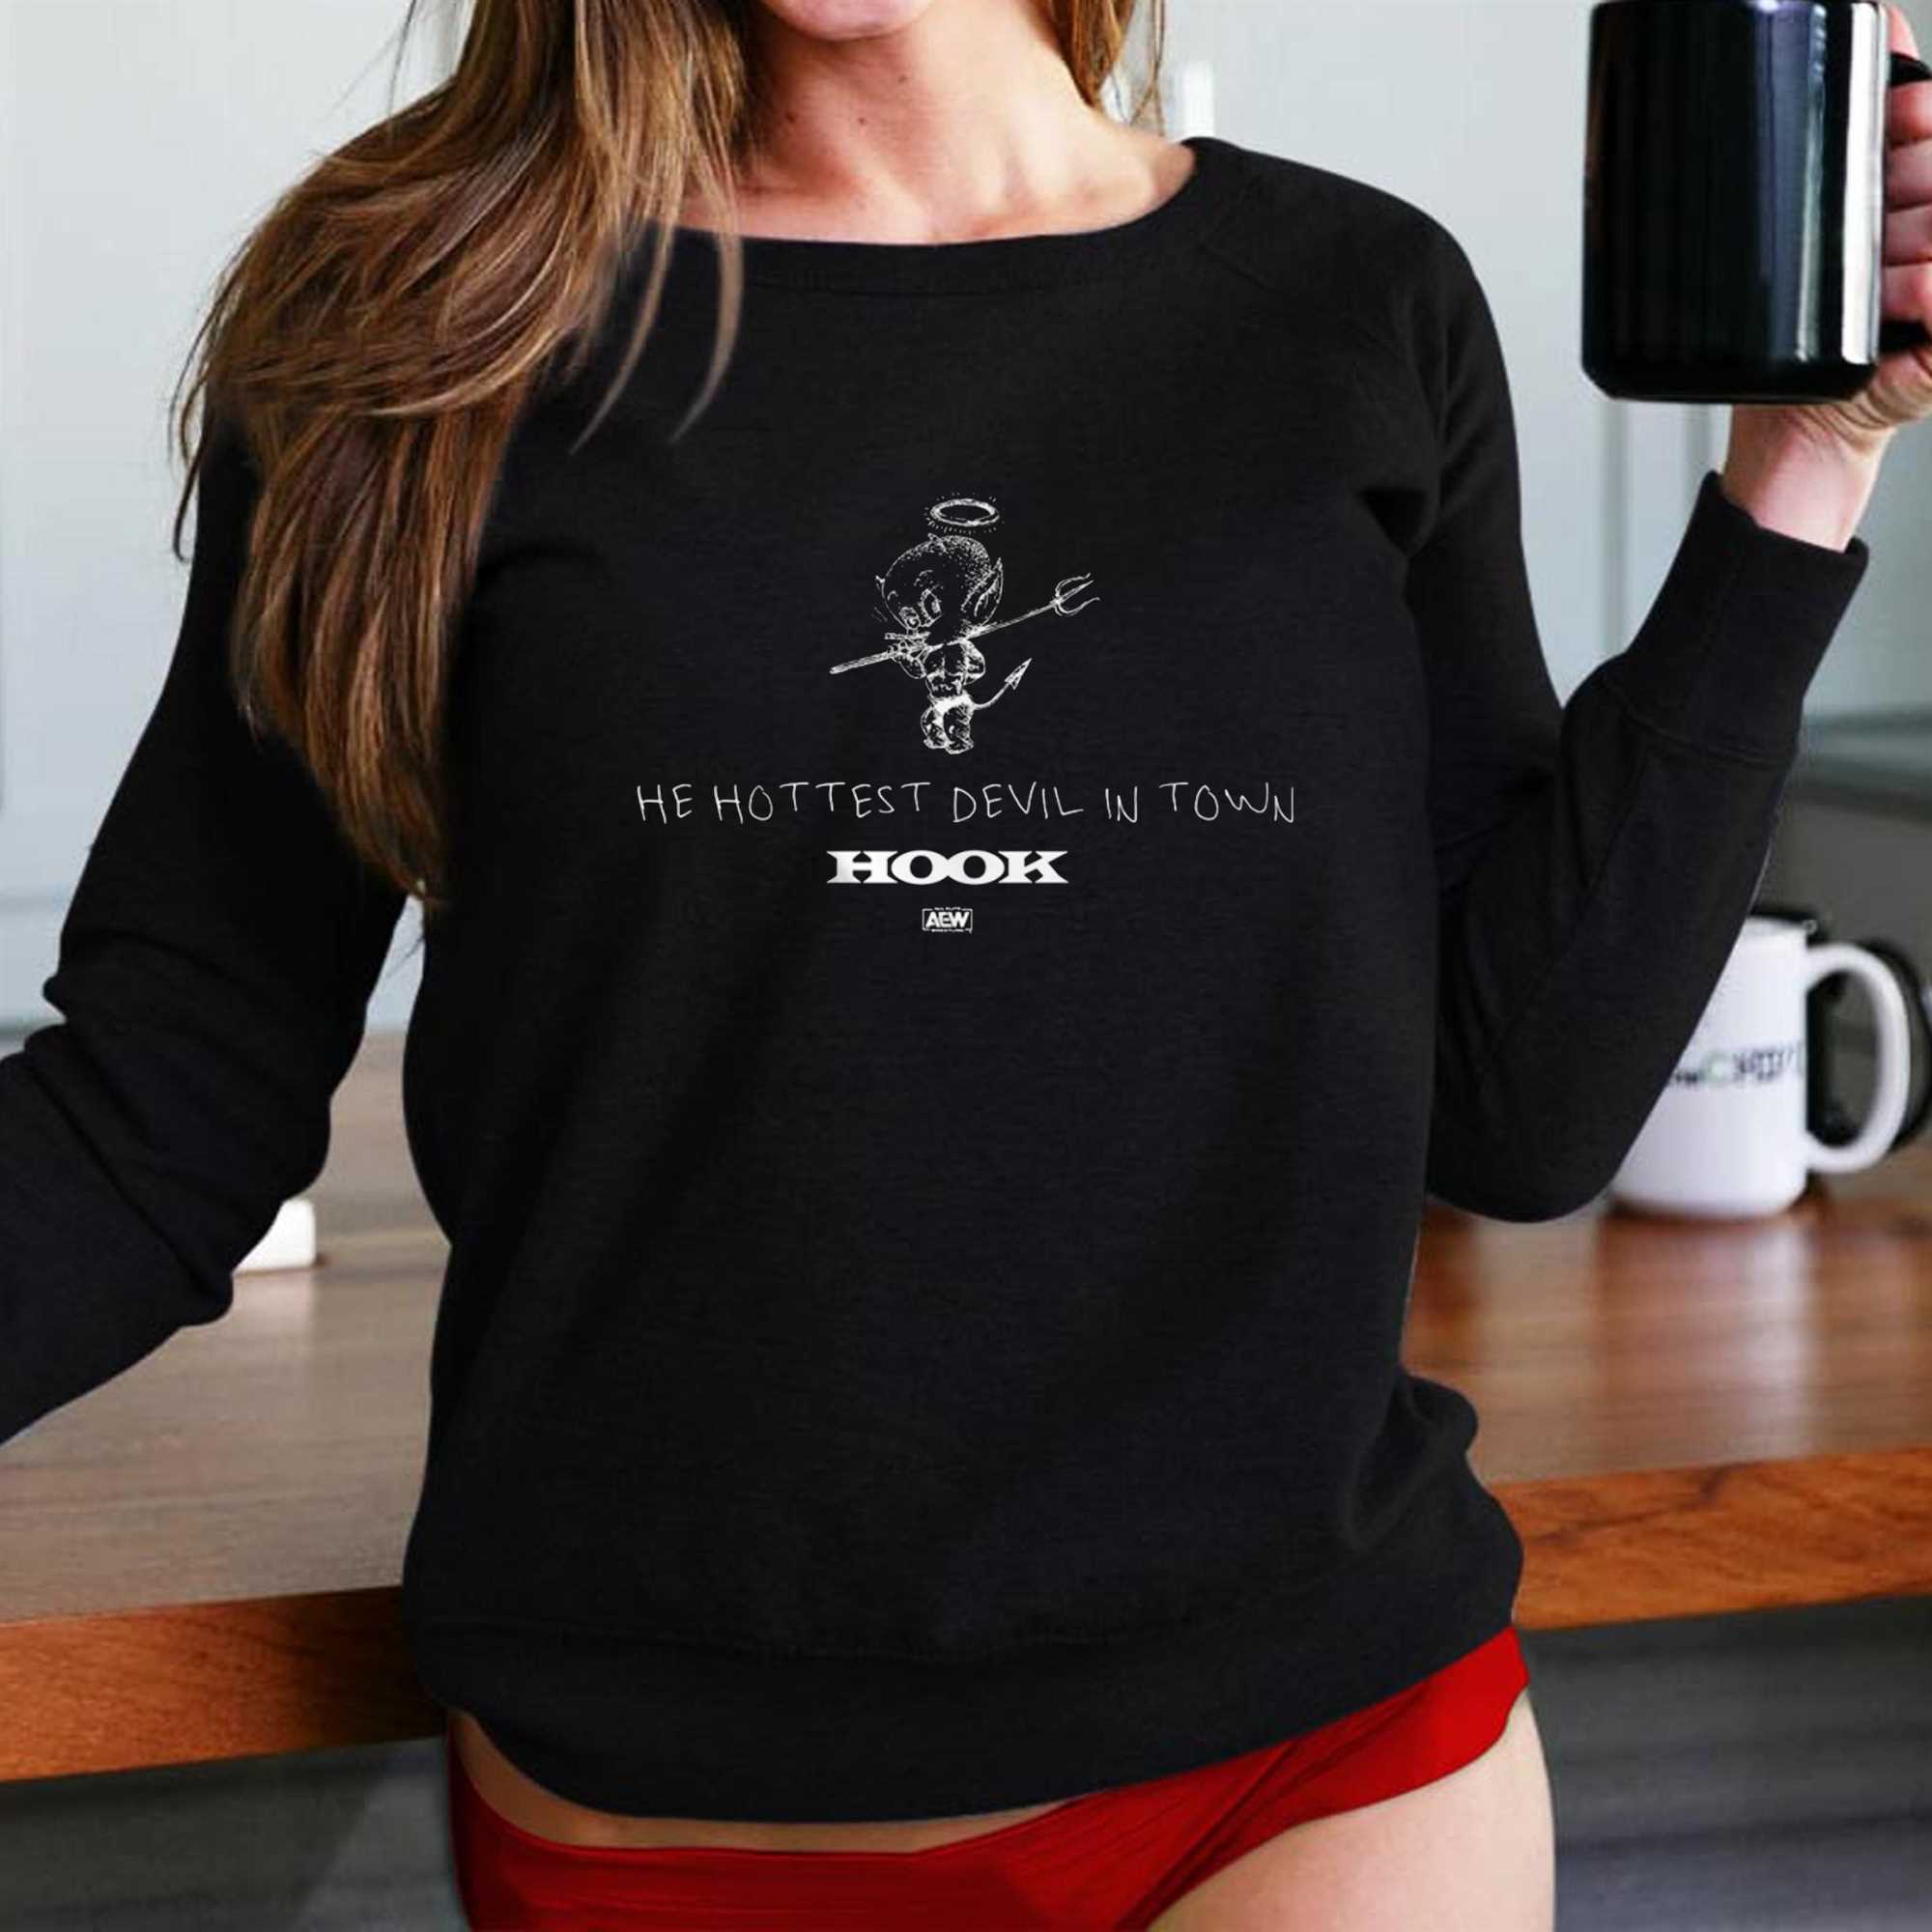 Hook - The Hottest Devil In Town Shirt - Shibtee Clothing